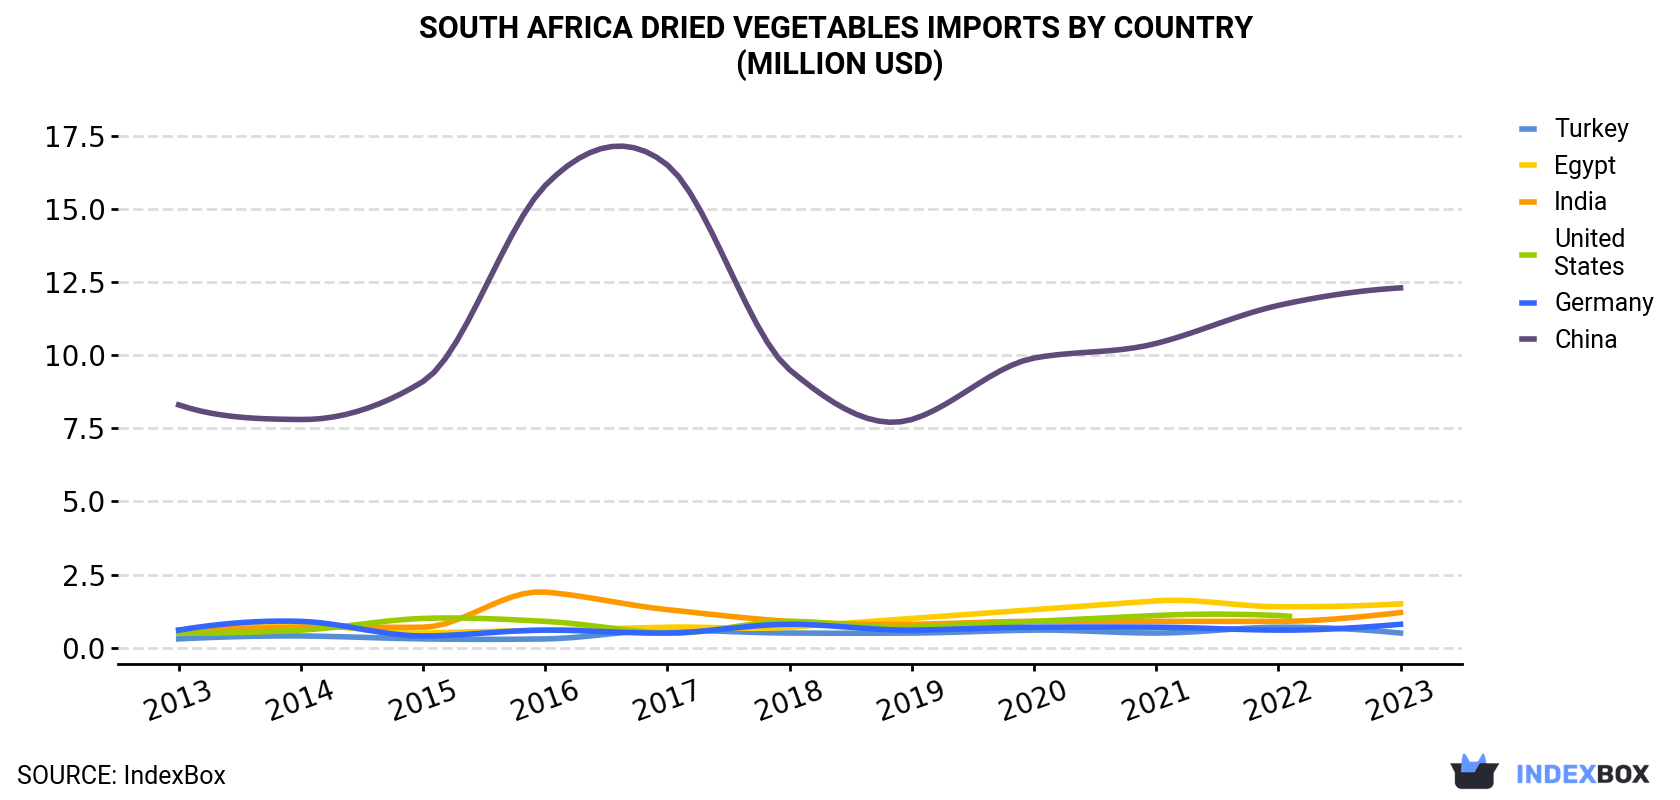 South Africa Dried Vegetables Imports By Country (Million USD)